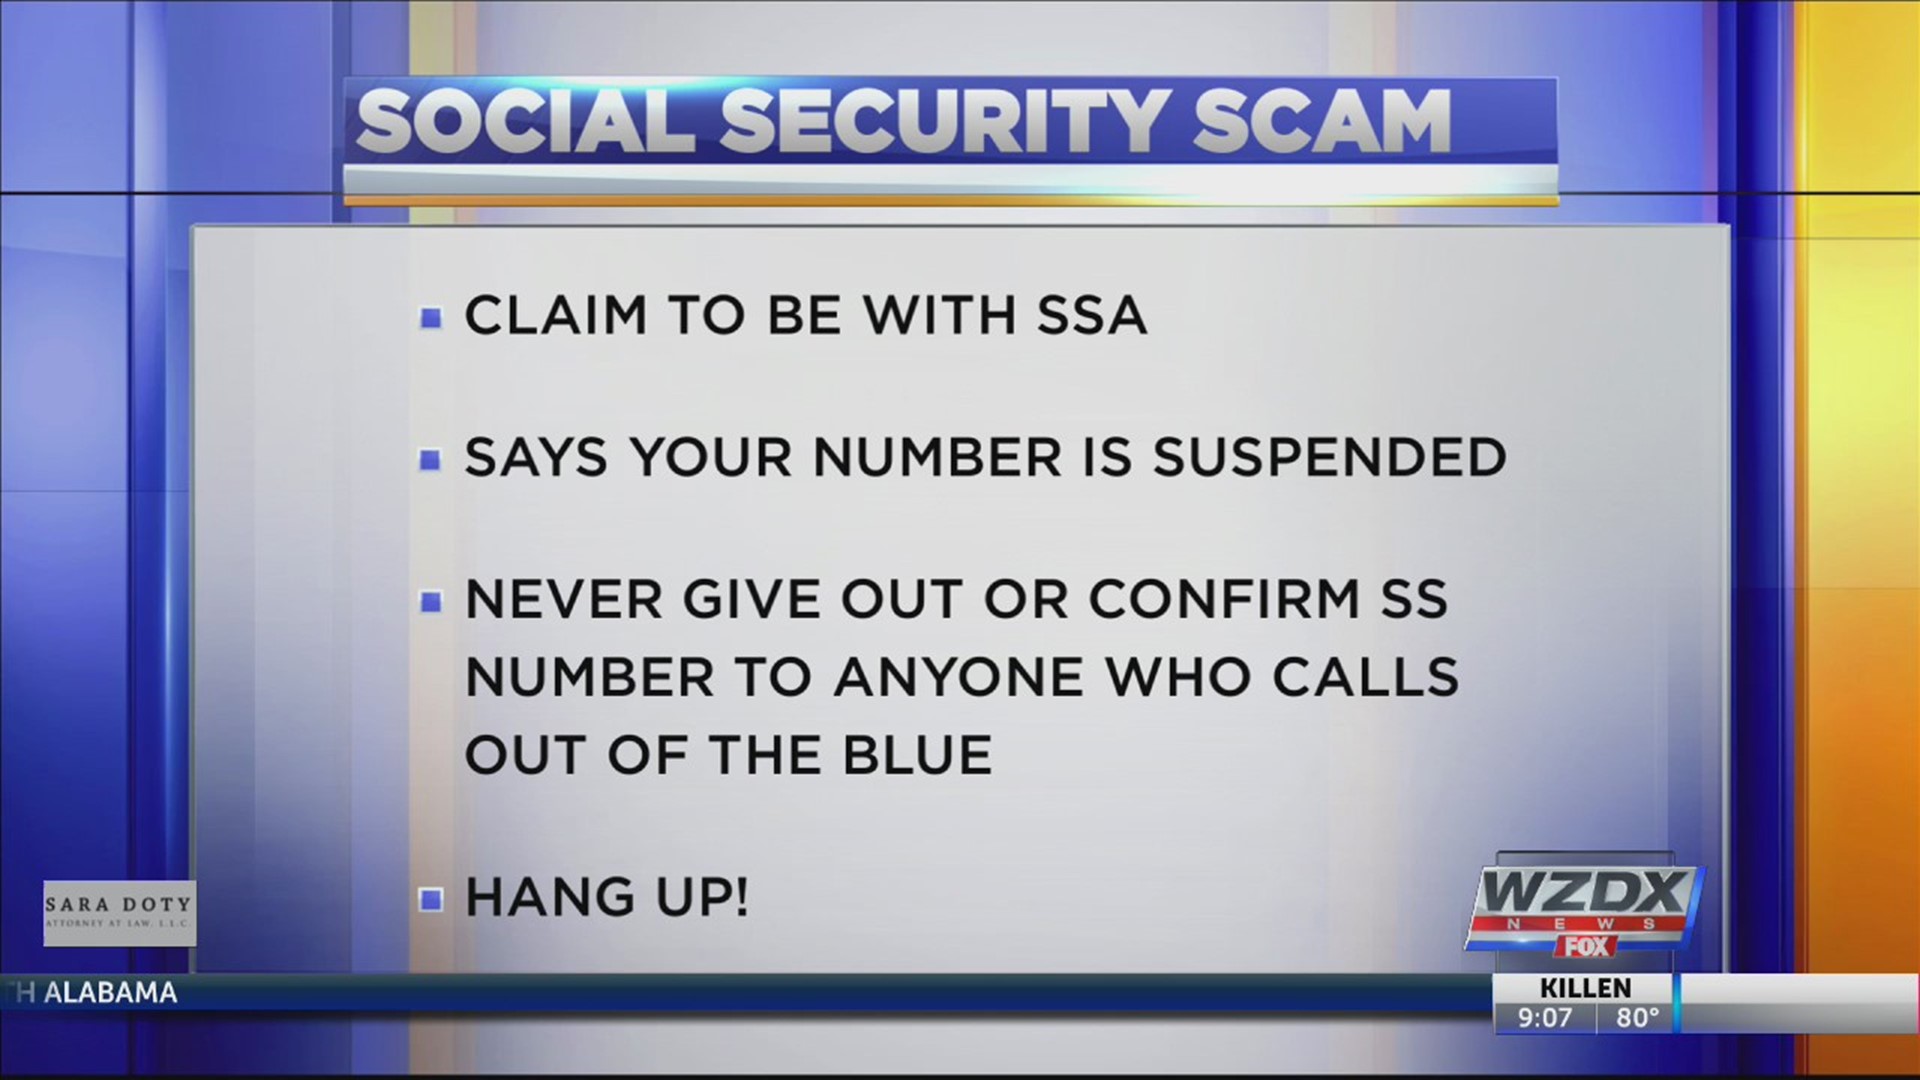 If someone calls you about your Social Security card or number, hang up.